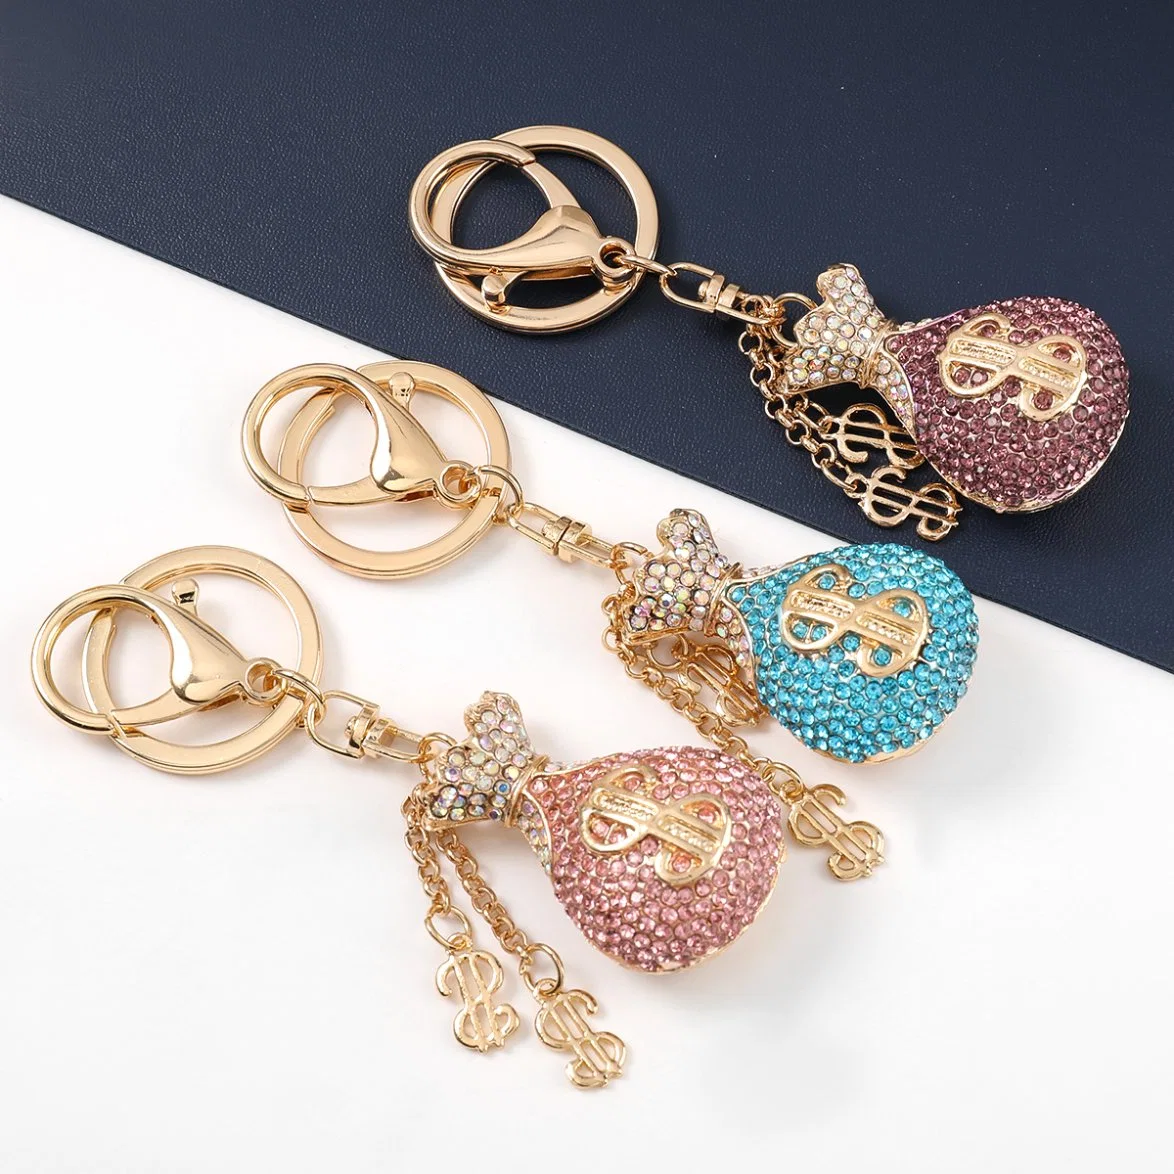 Rhinestone Metal Shine High Quality Souvenir Gift China Wholesale Accessories Zinc Alloy Metal Crafts Keychain for Sale